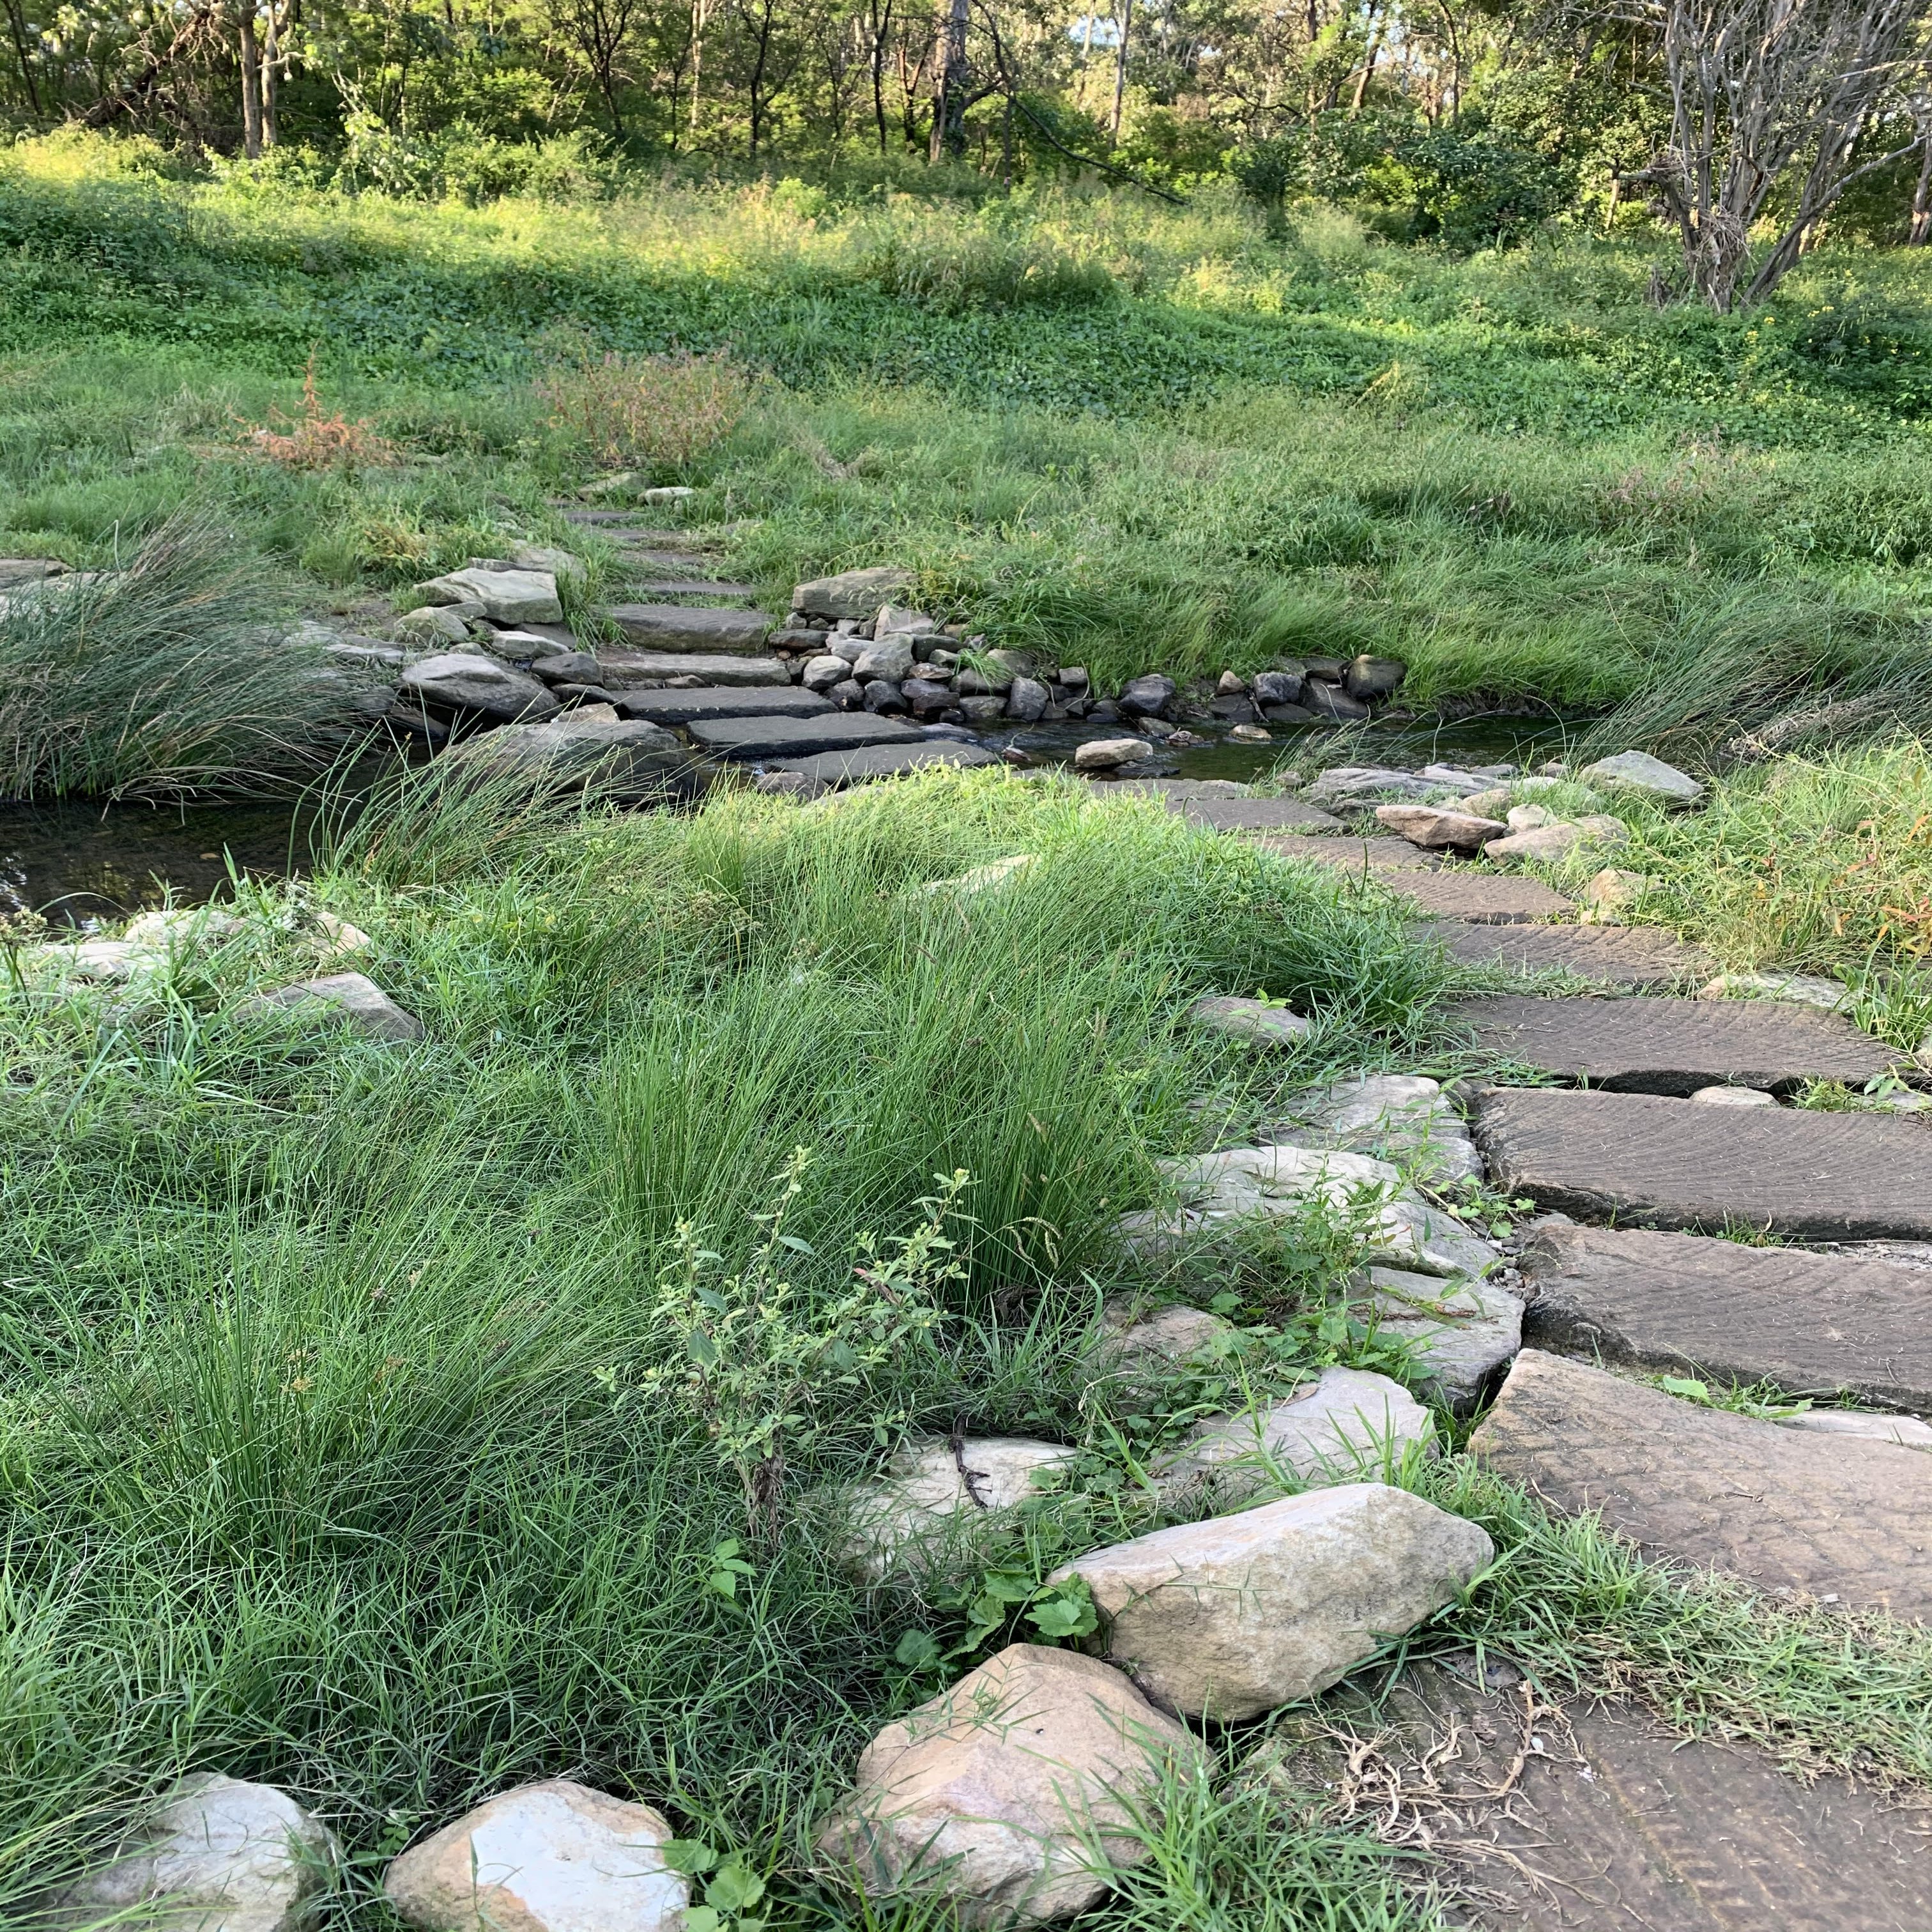 A stone path across a shallow creek, surrounded by lush greenery.